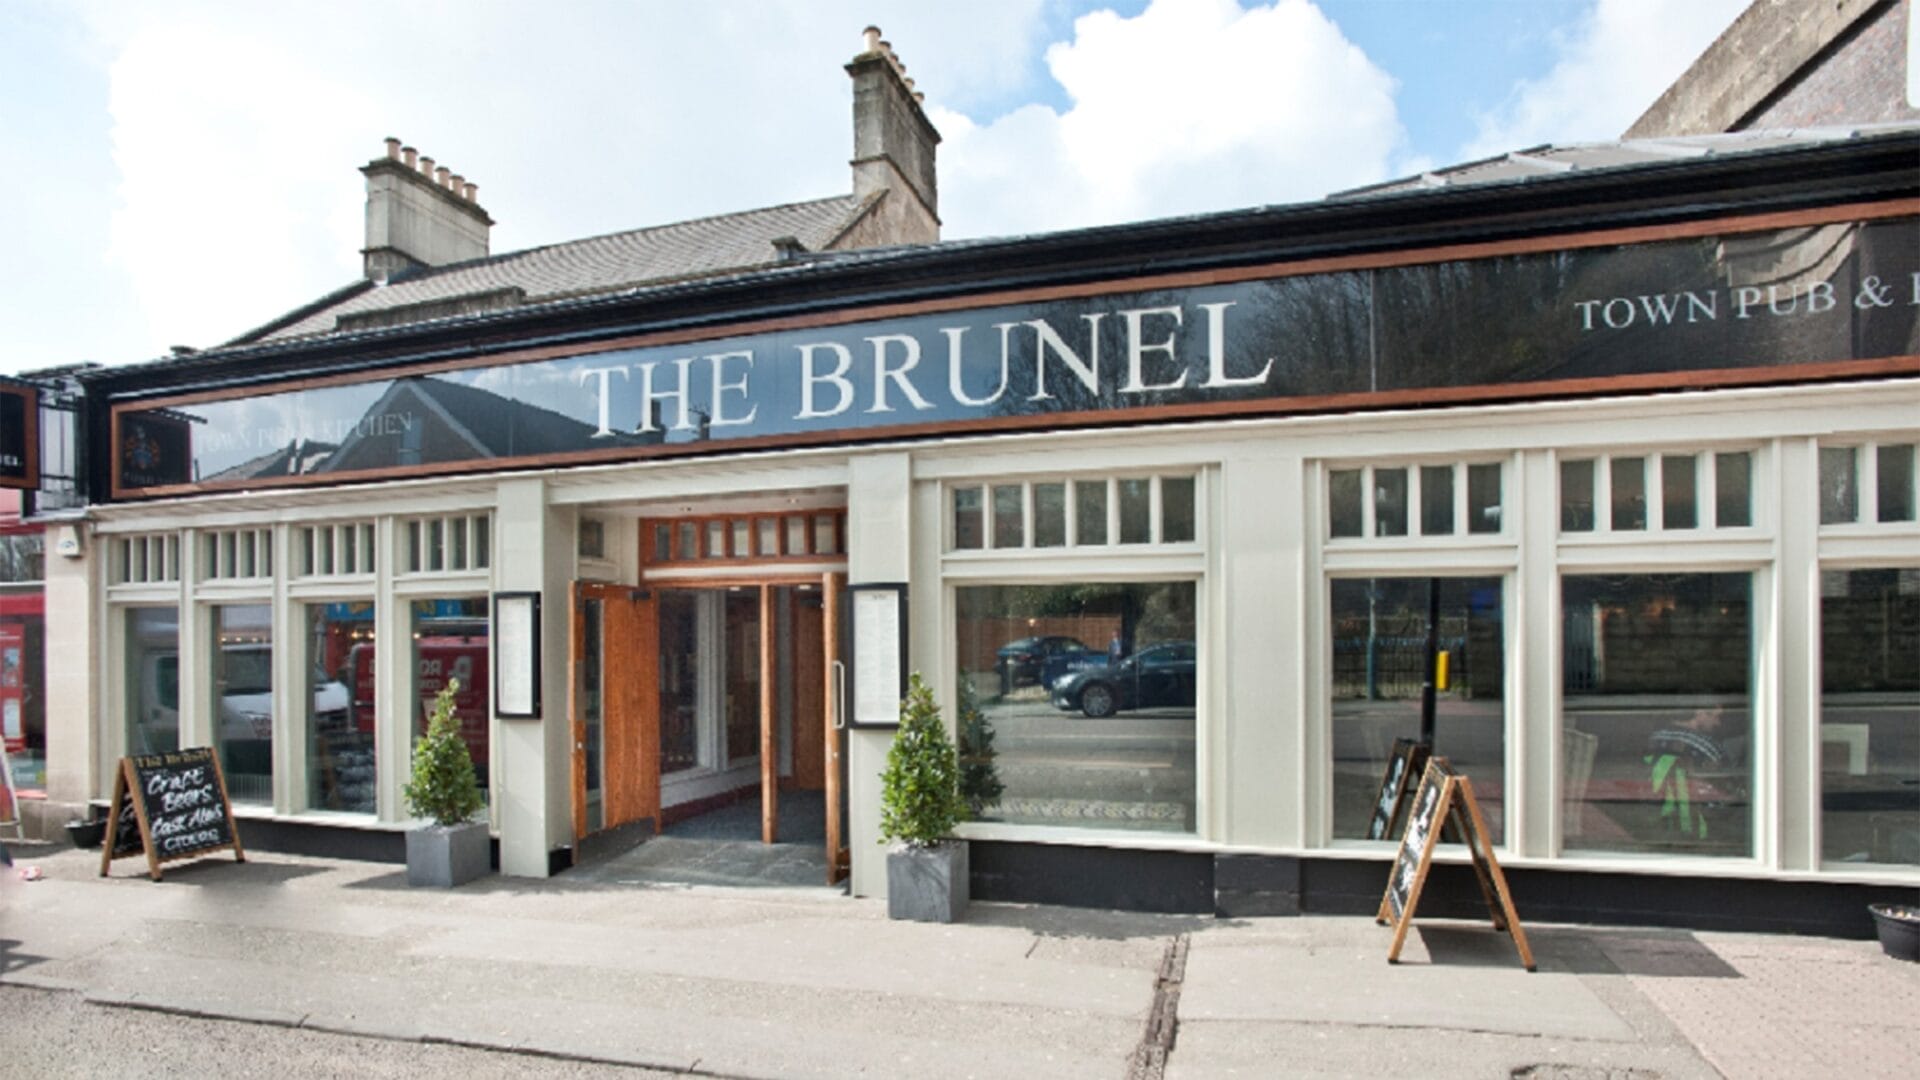 the brunel